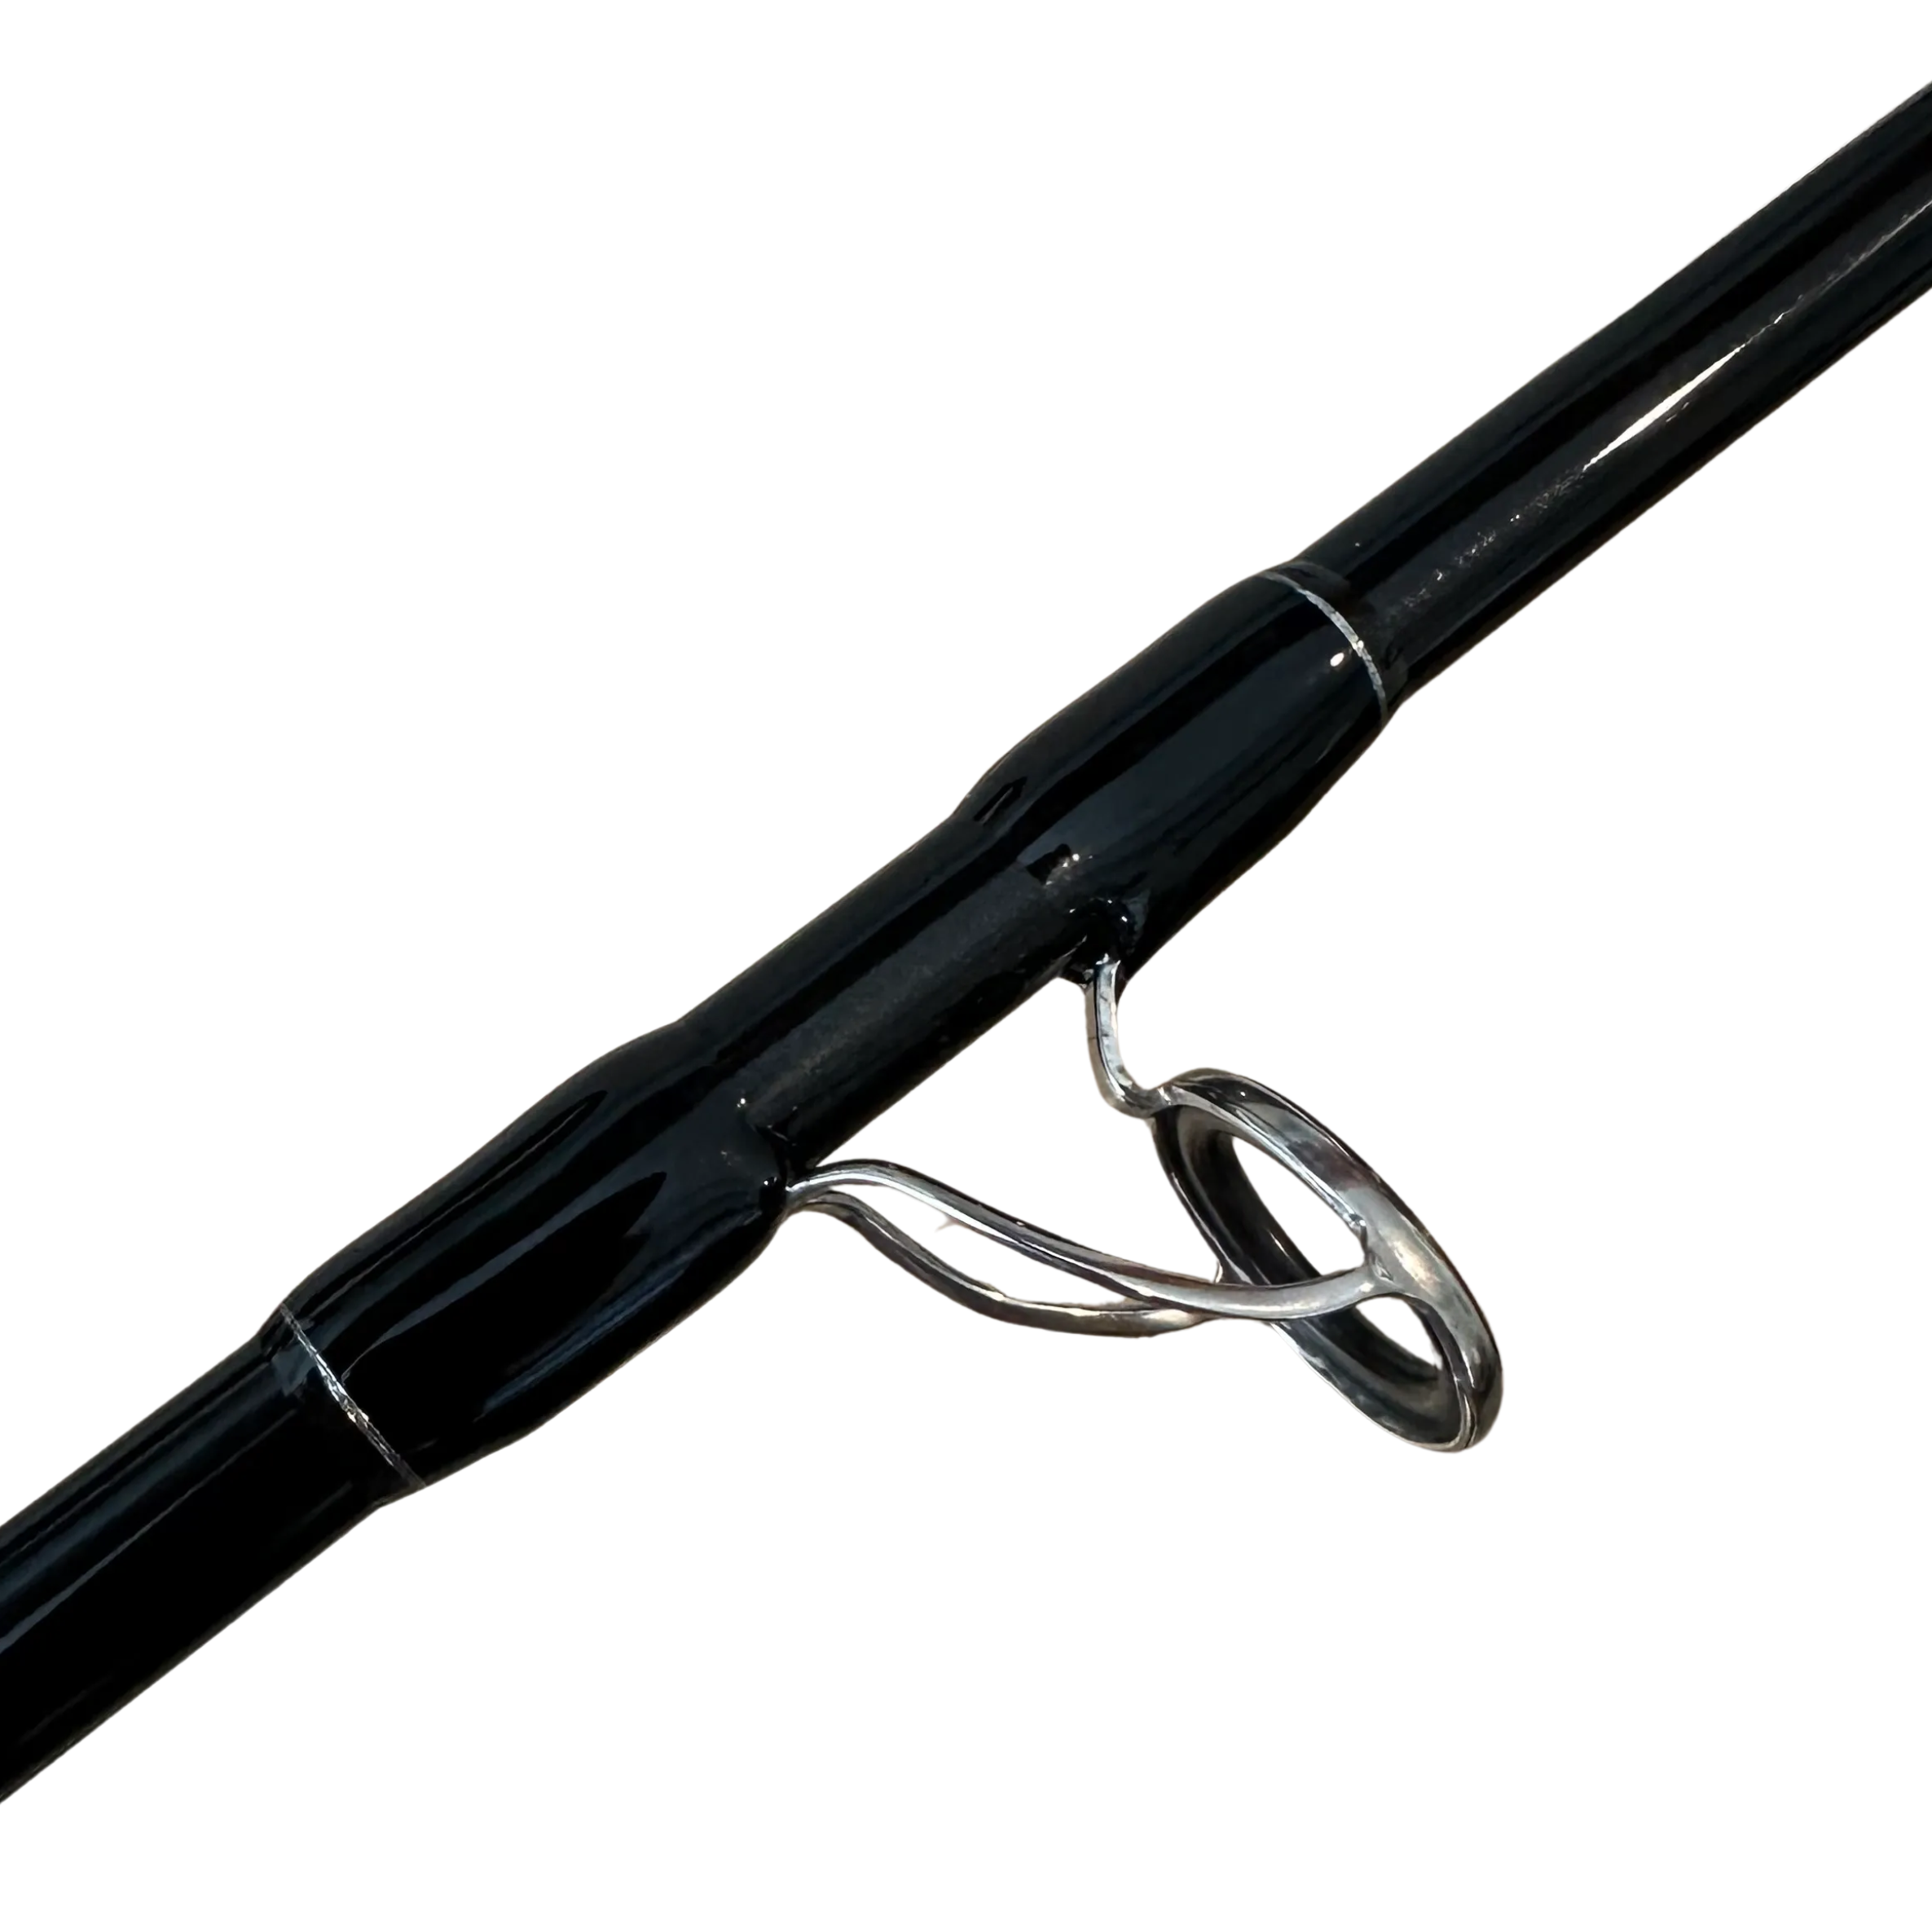 El Jefe Saltwater Fly Fishing Combo Package |904-8 | 9' Four Section 8 Weight Fly Rod And Reel Outfit